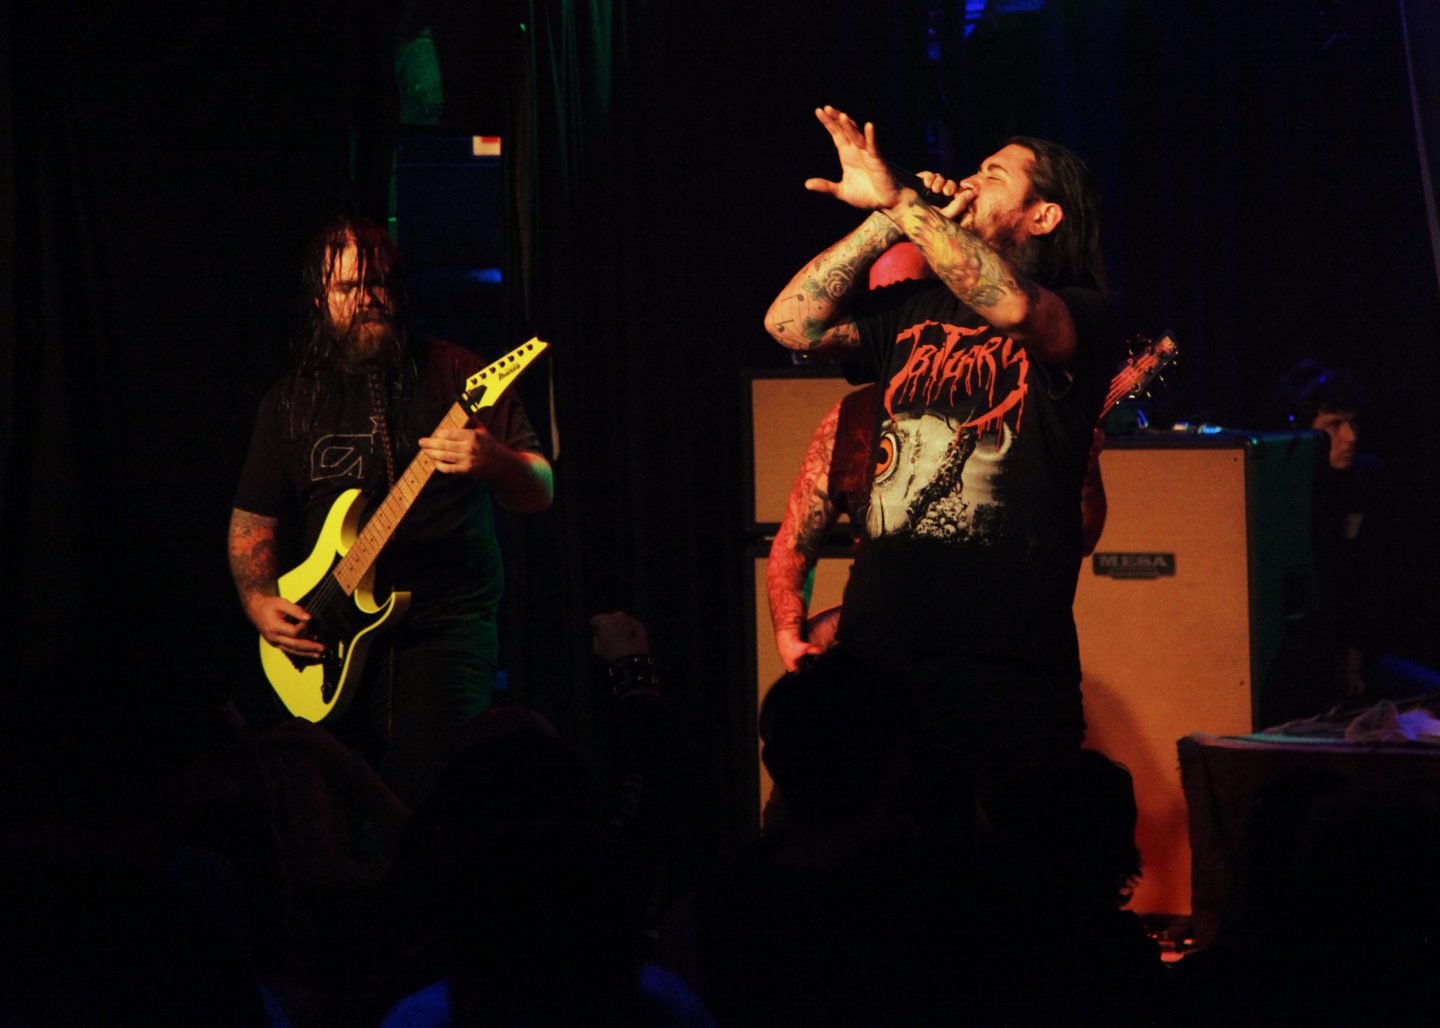 Fit For An Autopsy at Reggie's Rock Club by Sanchi Engineer